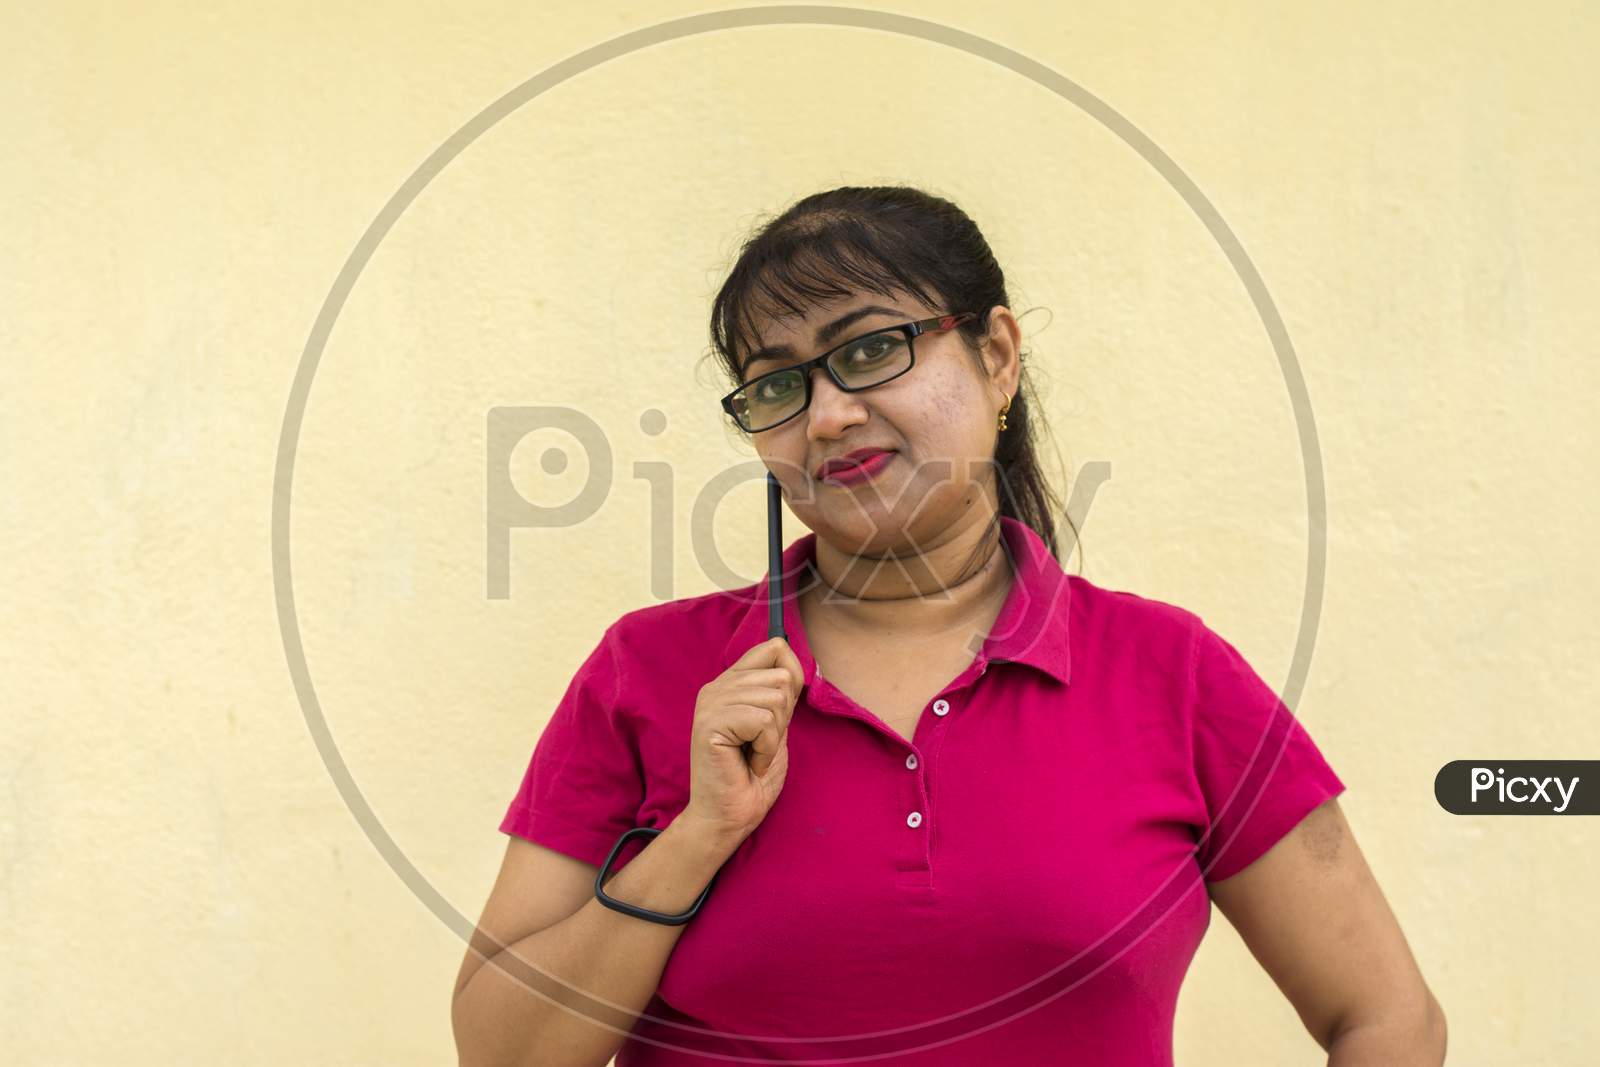 Indian Female Model Looking Straight Happily With Slight Smiling Face A Pen In Her Hand In Yellow Background With Copy Space For Text